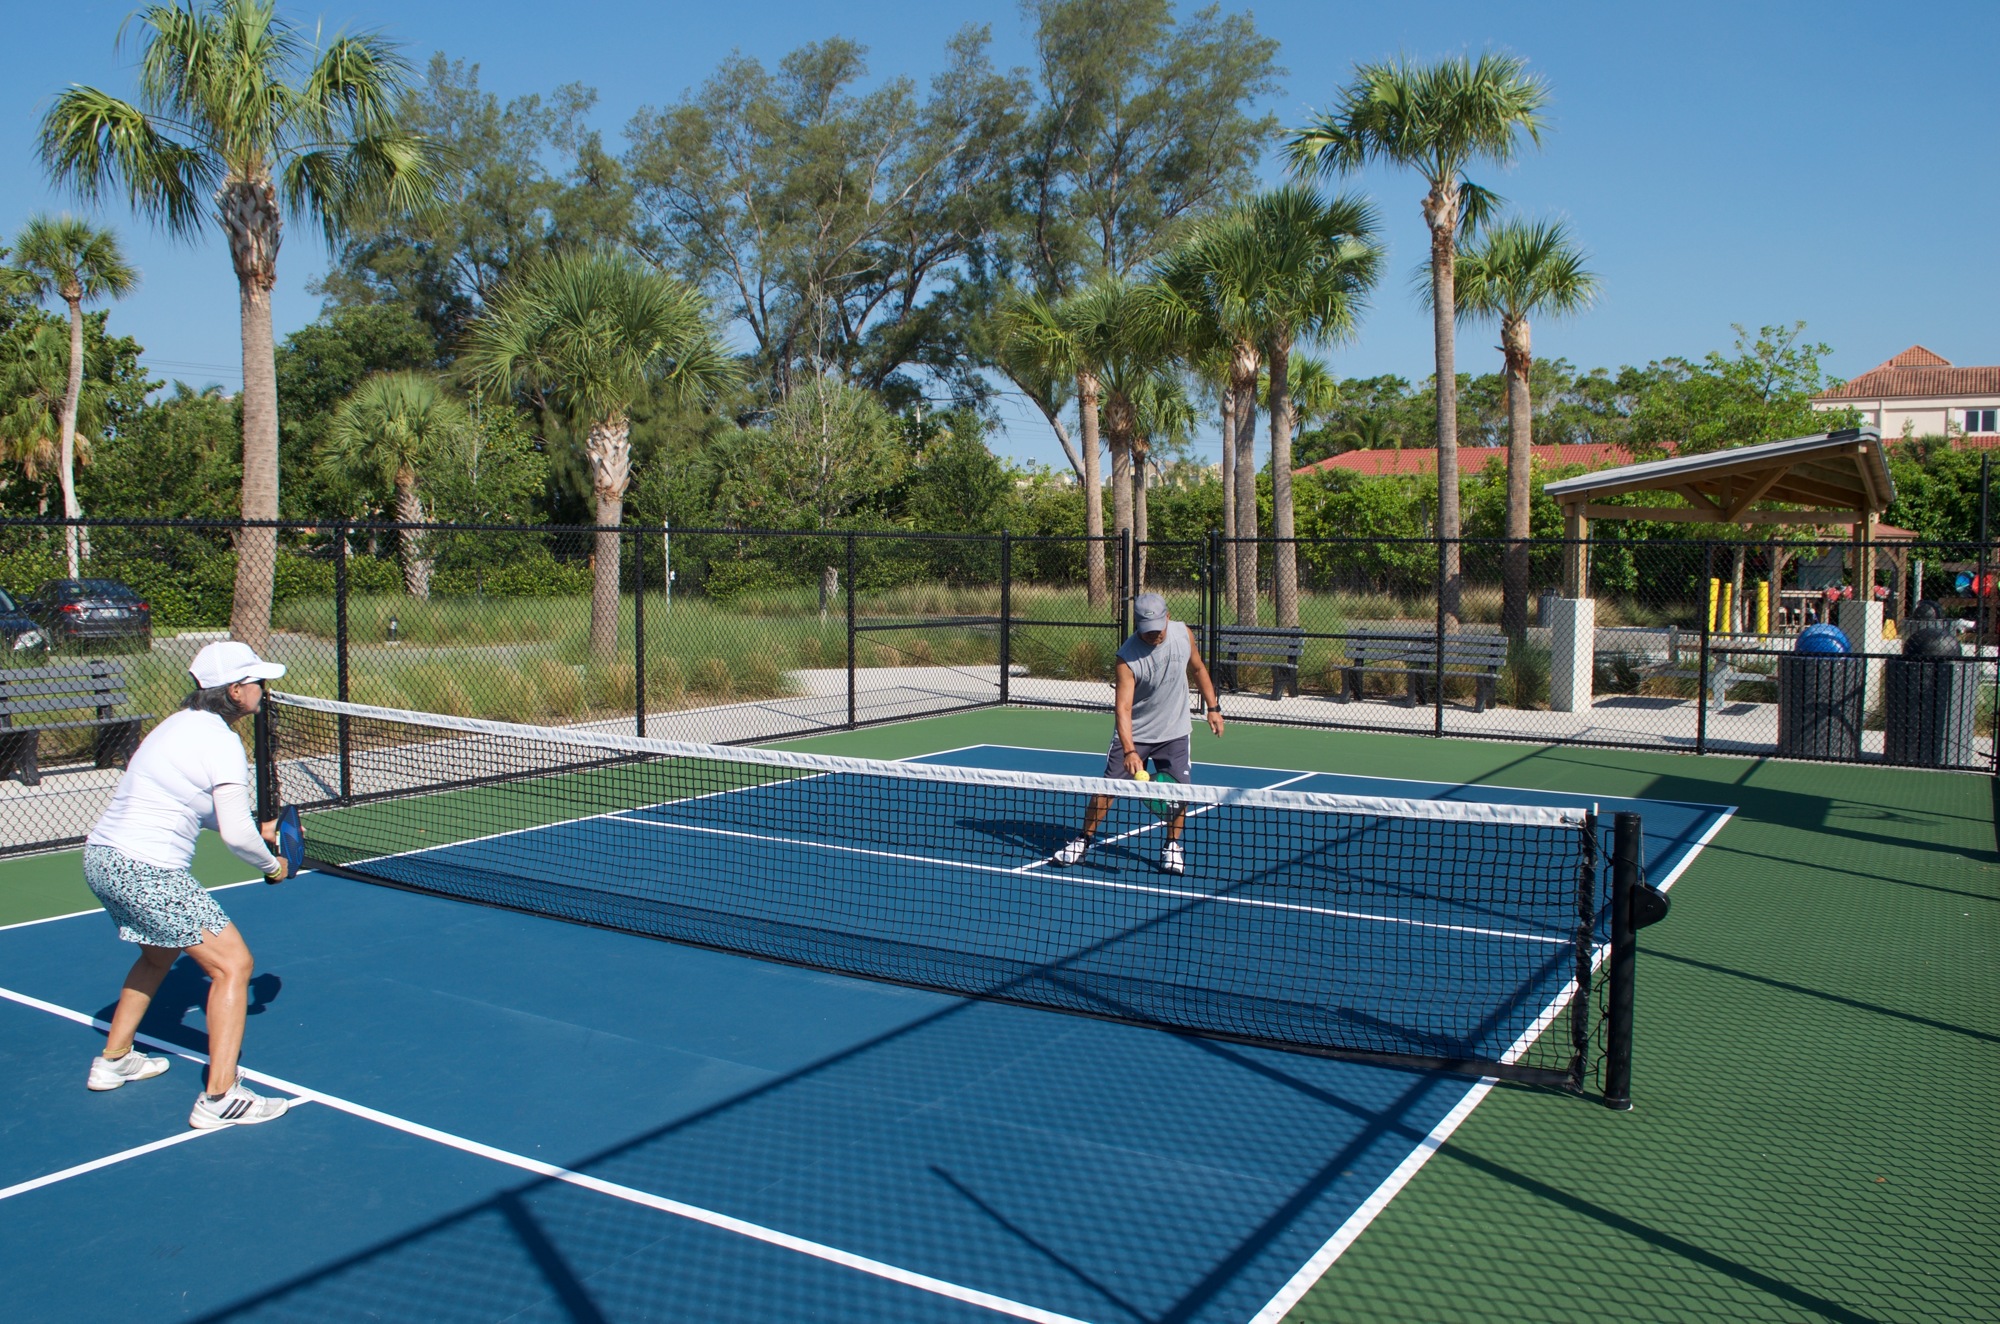 Pickleball courts are coming to Bayfront Park. The question is, where will the town build new public tennis courts?